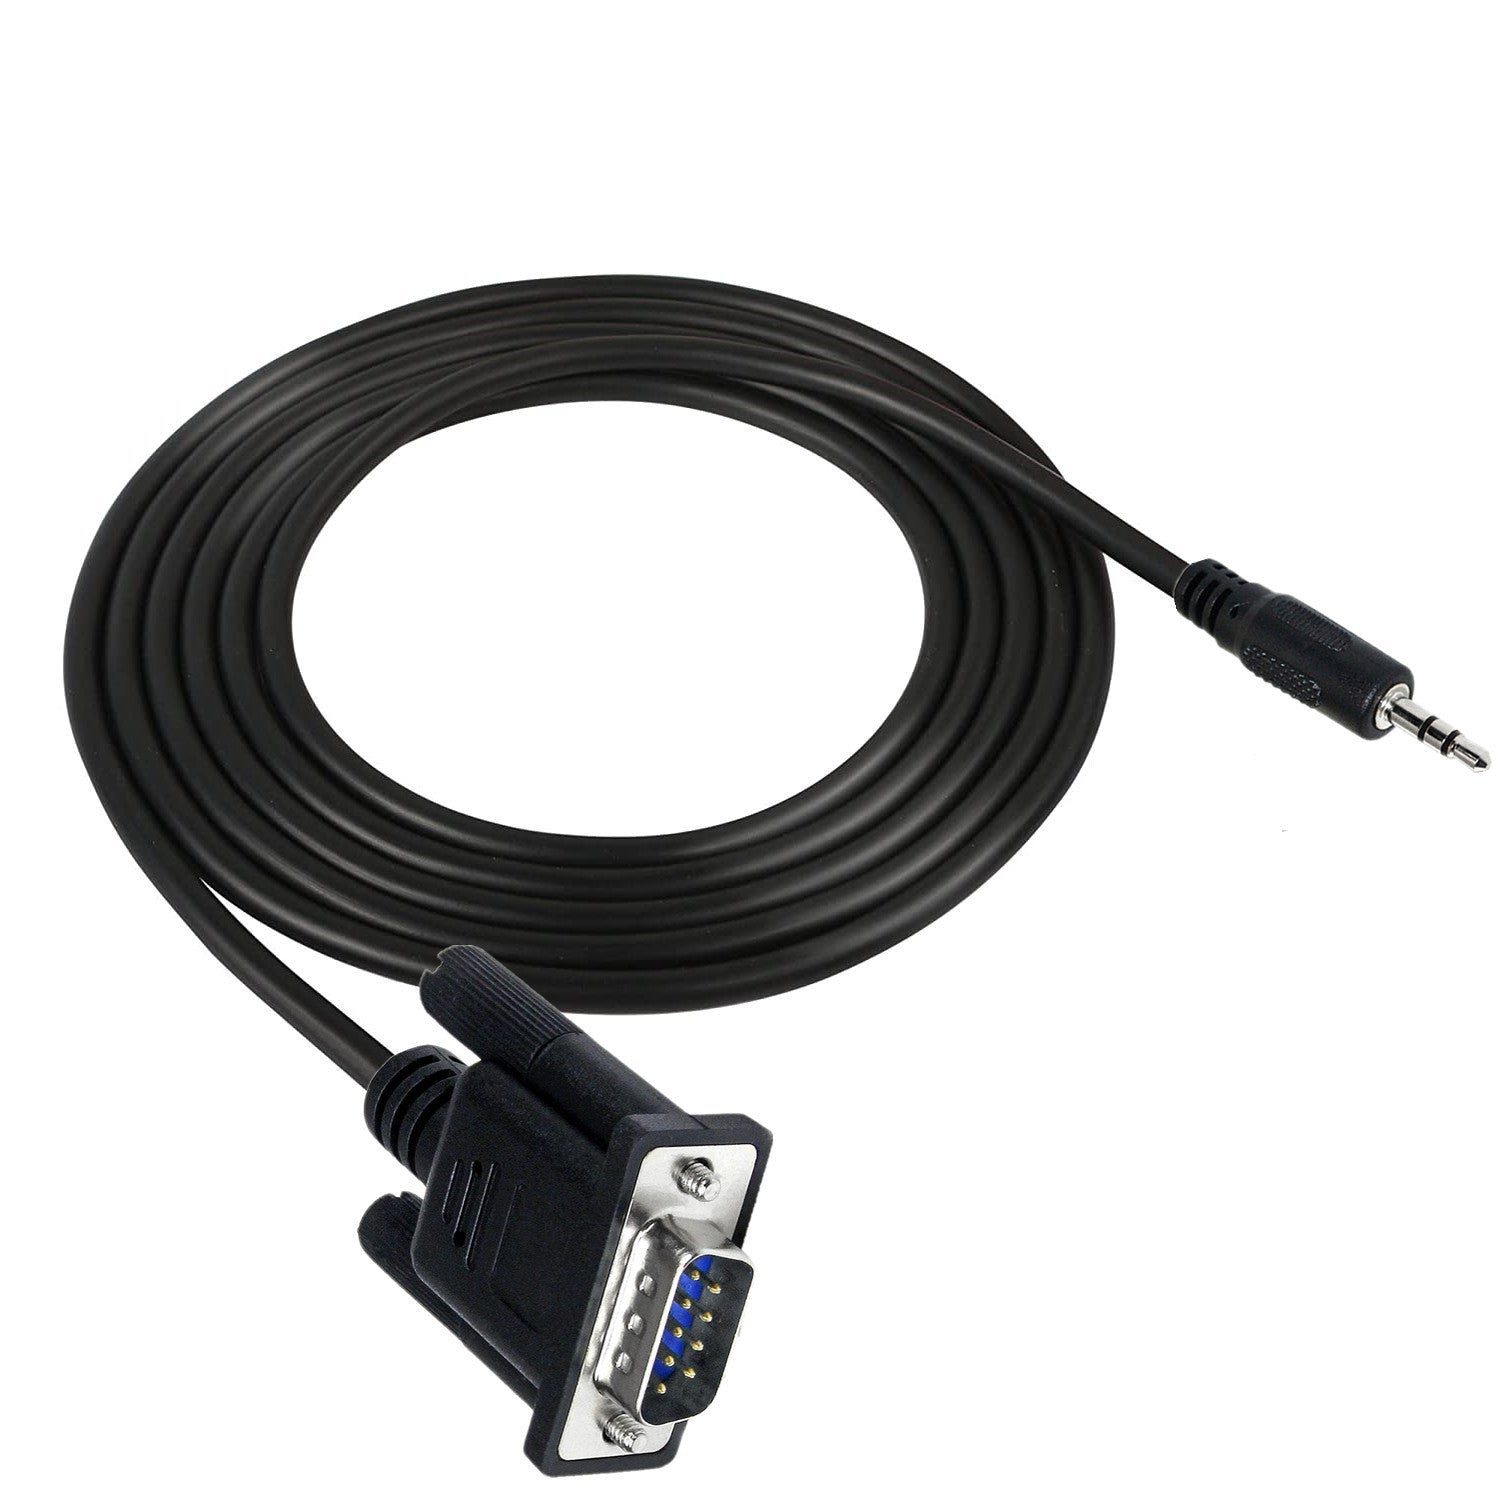 DB9 RS232 Male to 3.5mm Serial Cable 1.8m